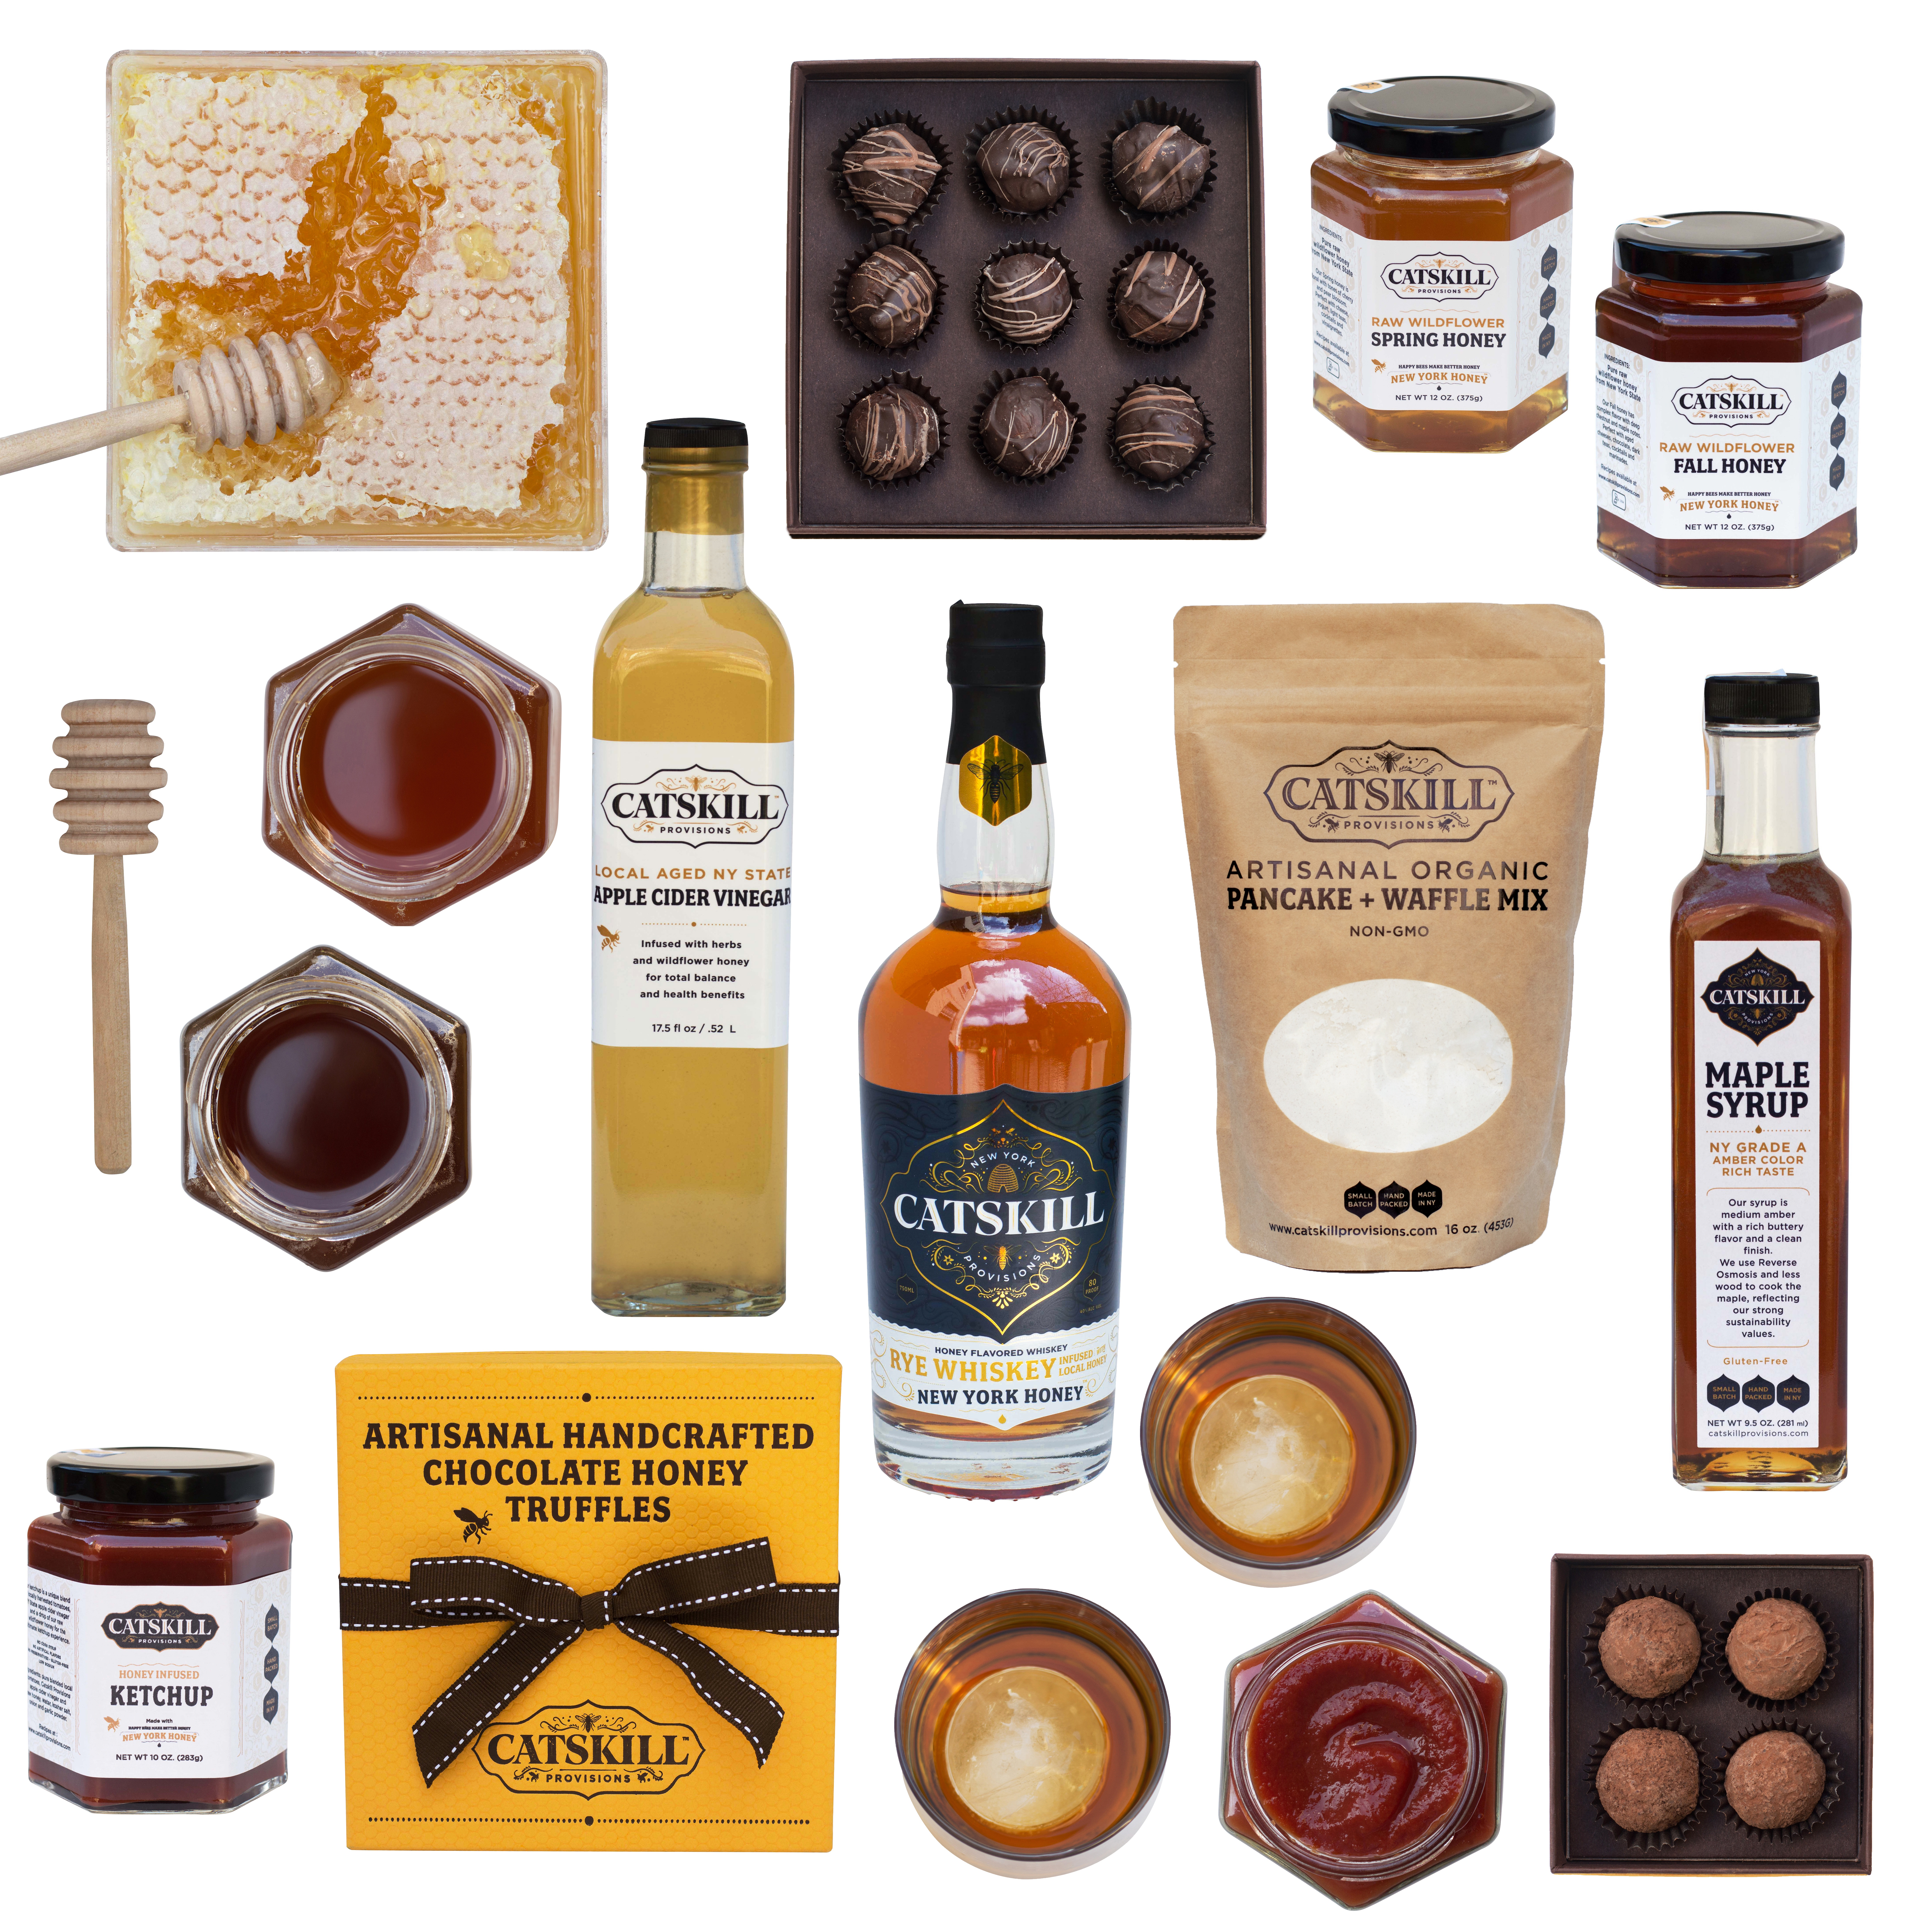 From seasonal honey to infused chocolates, maple syrup and whiskey, Catskill Provisions has got you covered!